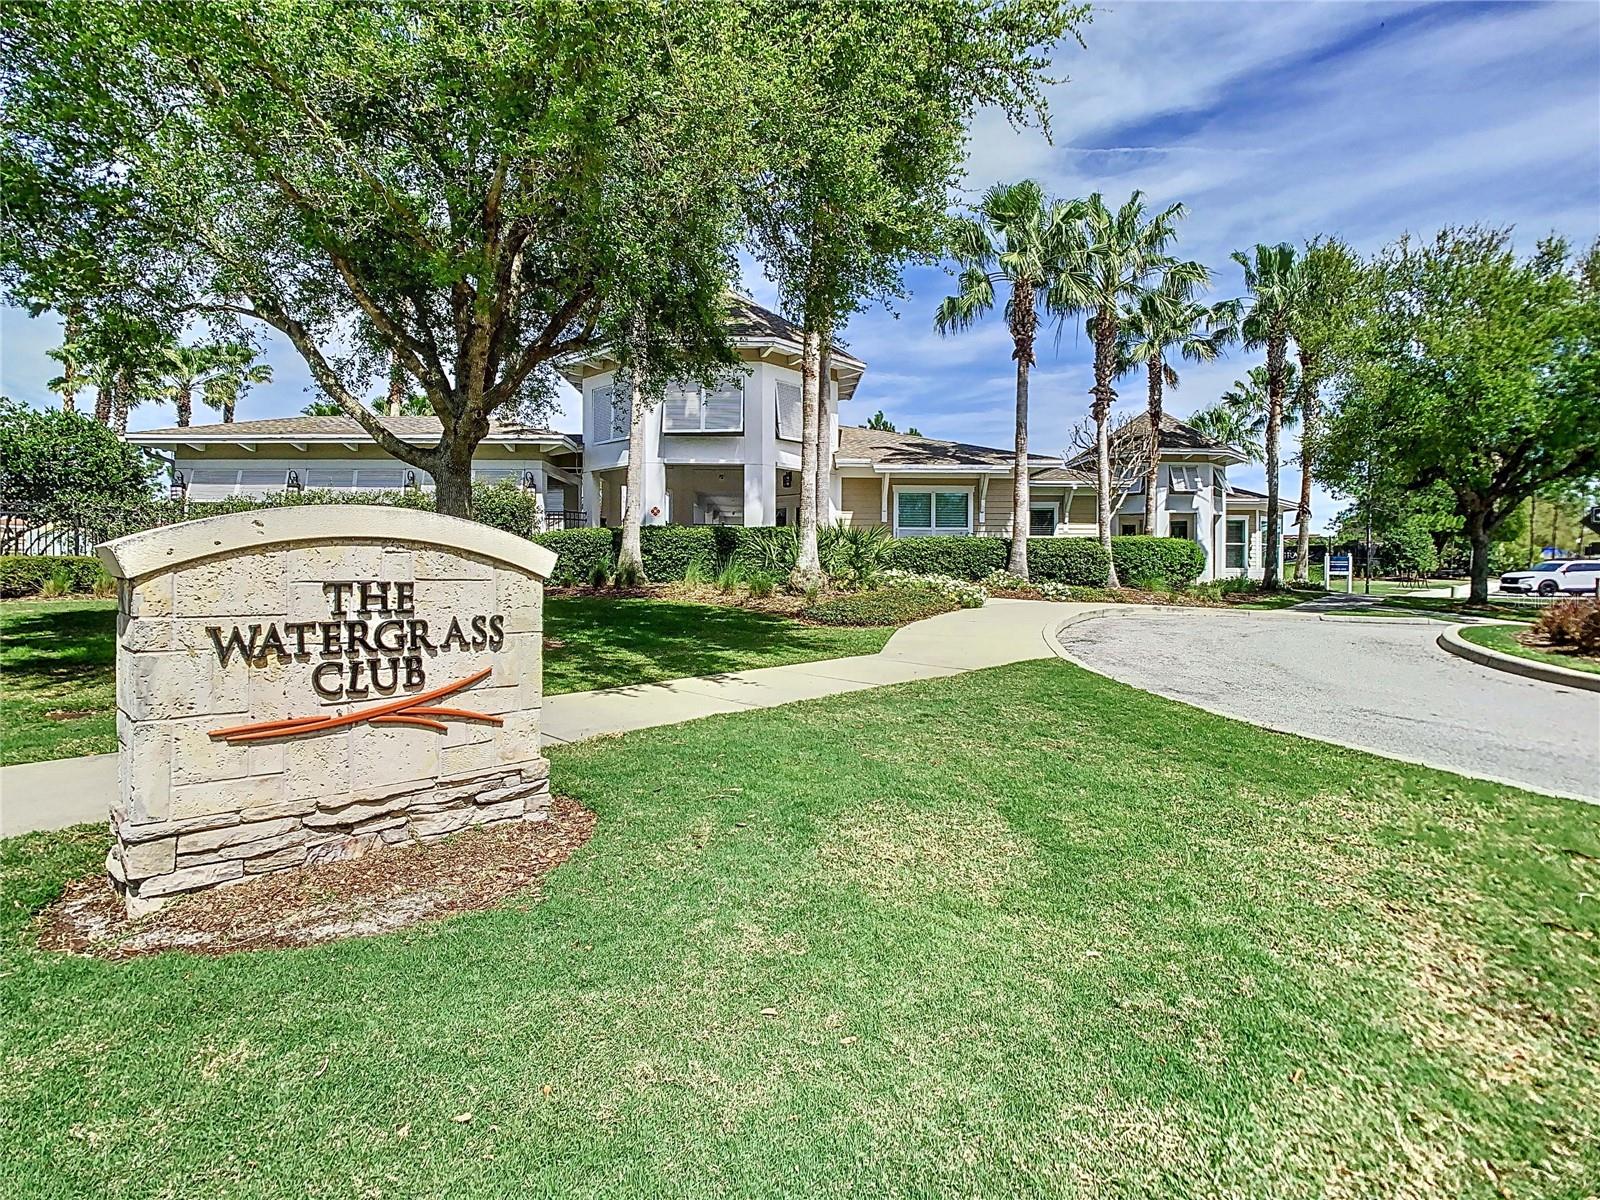 Watergrass clubhouse and sign